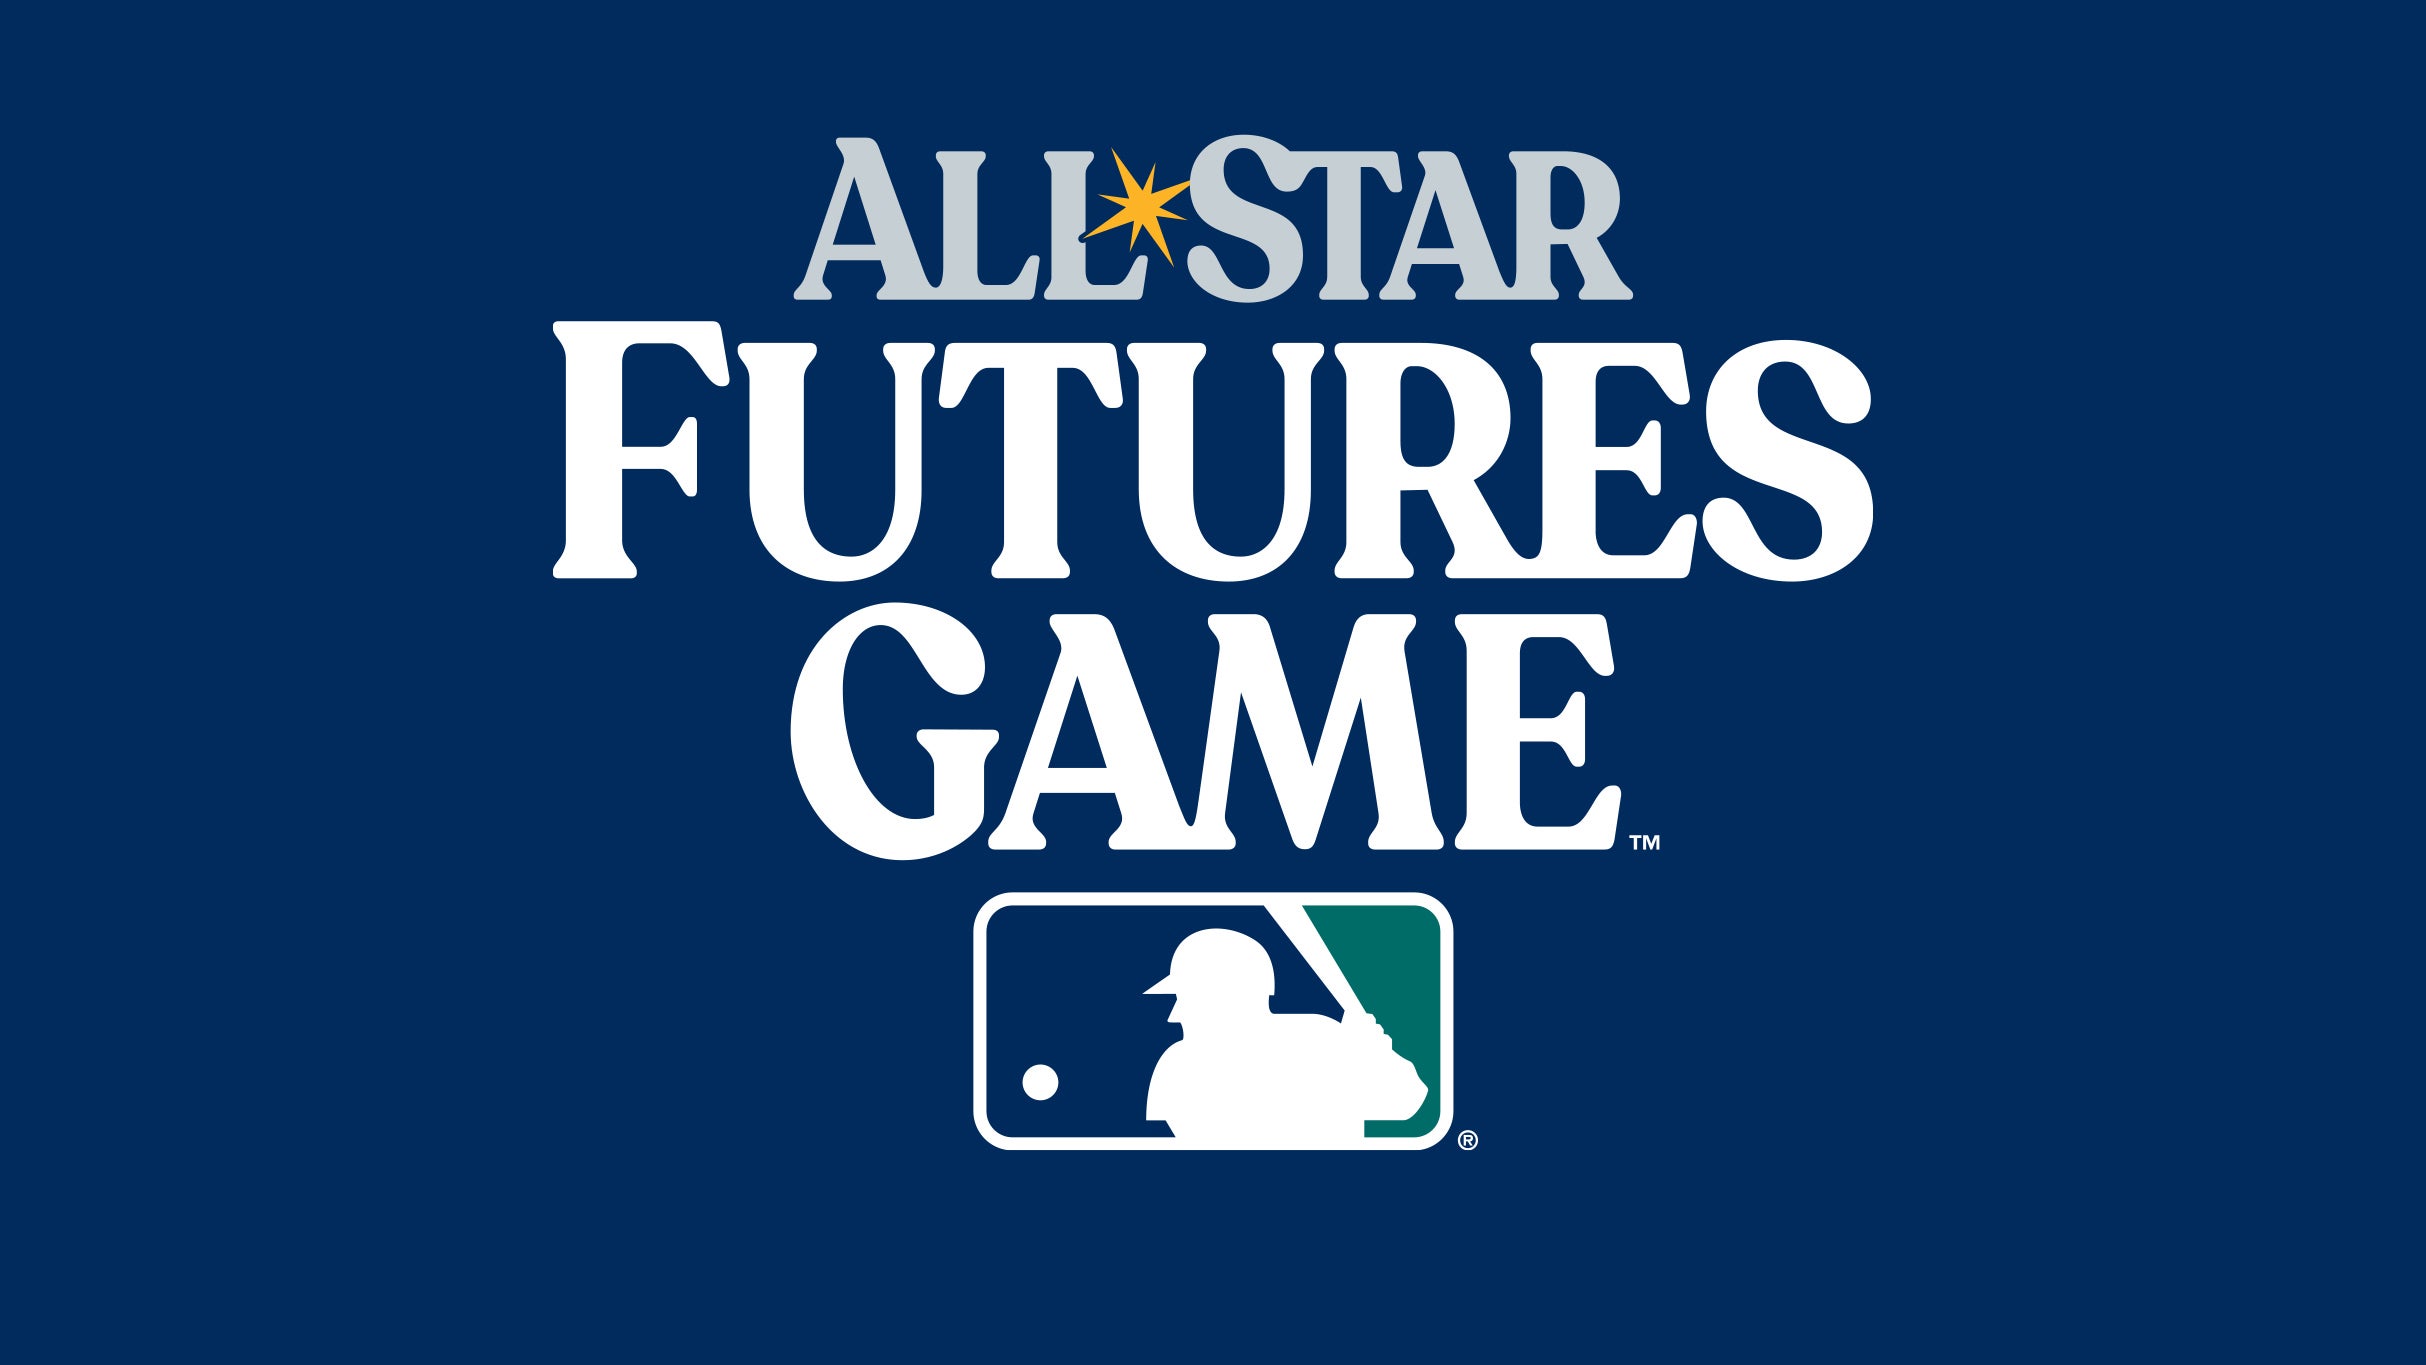 2023 MLB Futures / Celebrity Softball in Seattle promo photo for Mariners Members Presale May 23 presale offer code